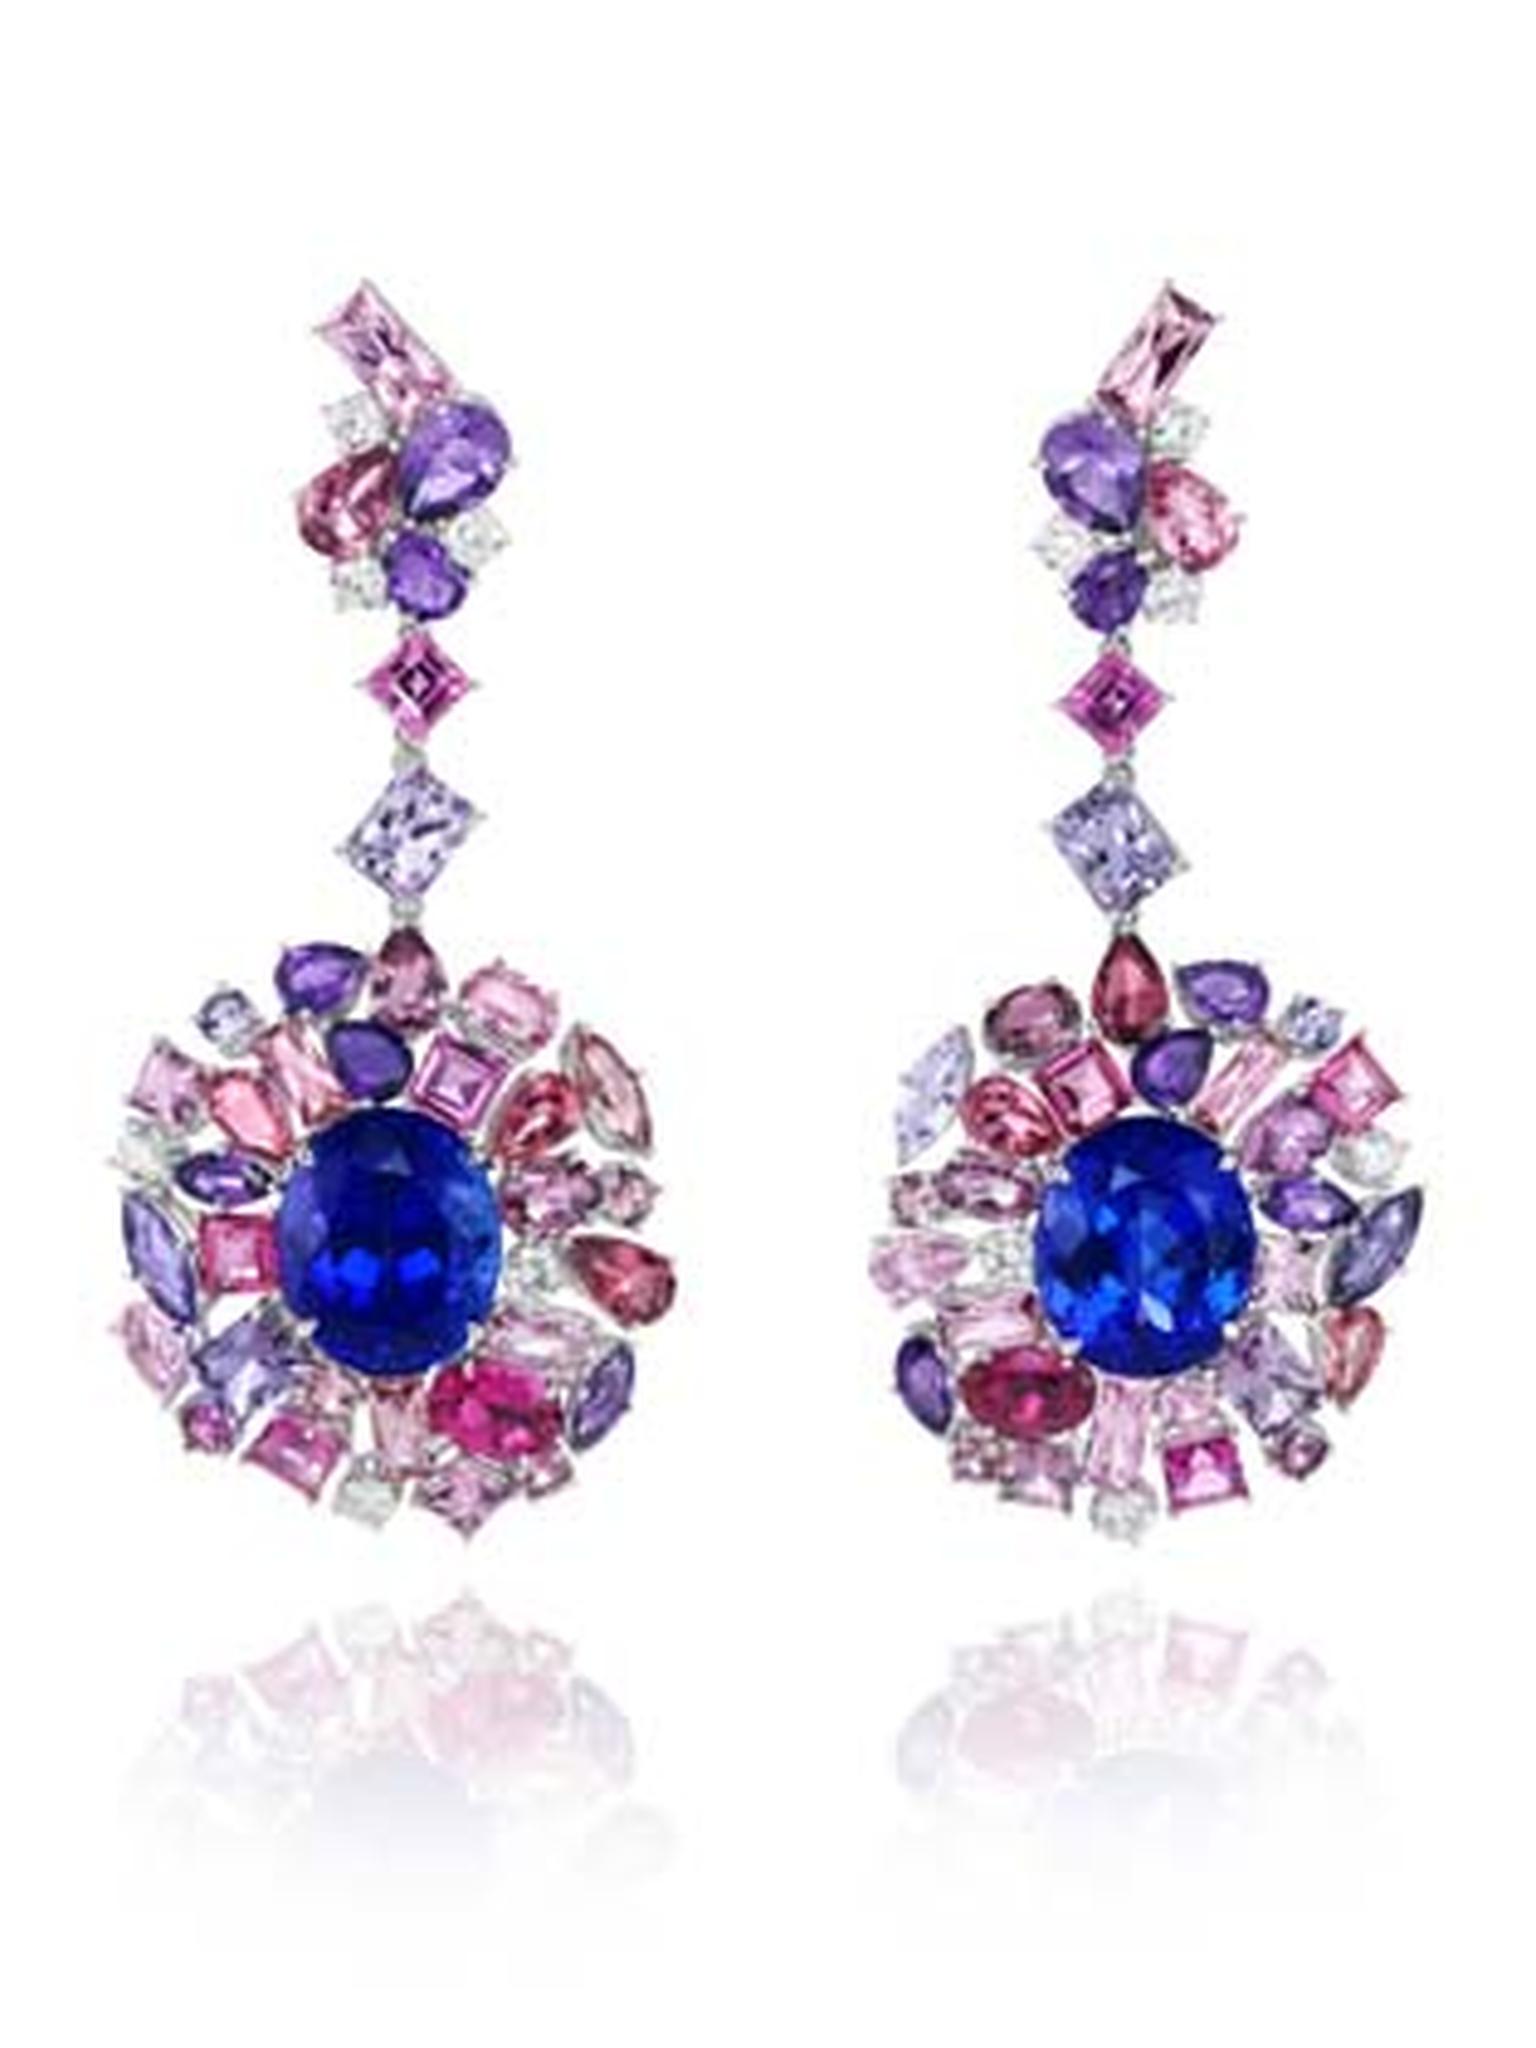 849374-1001 Tanzanite Earrings  from the Red Carpet Collection 2013Chopard.jpg